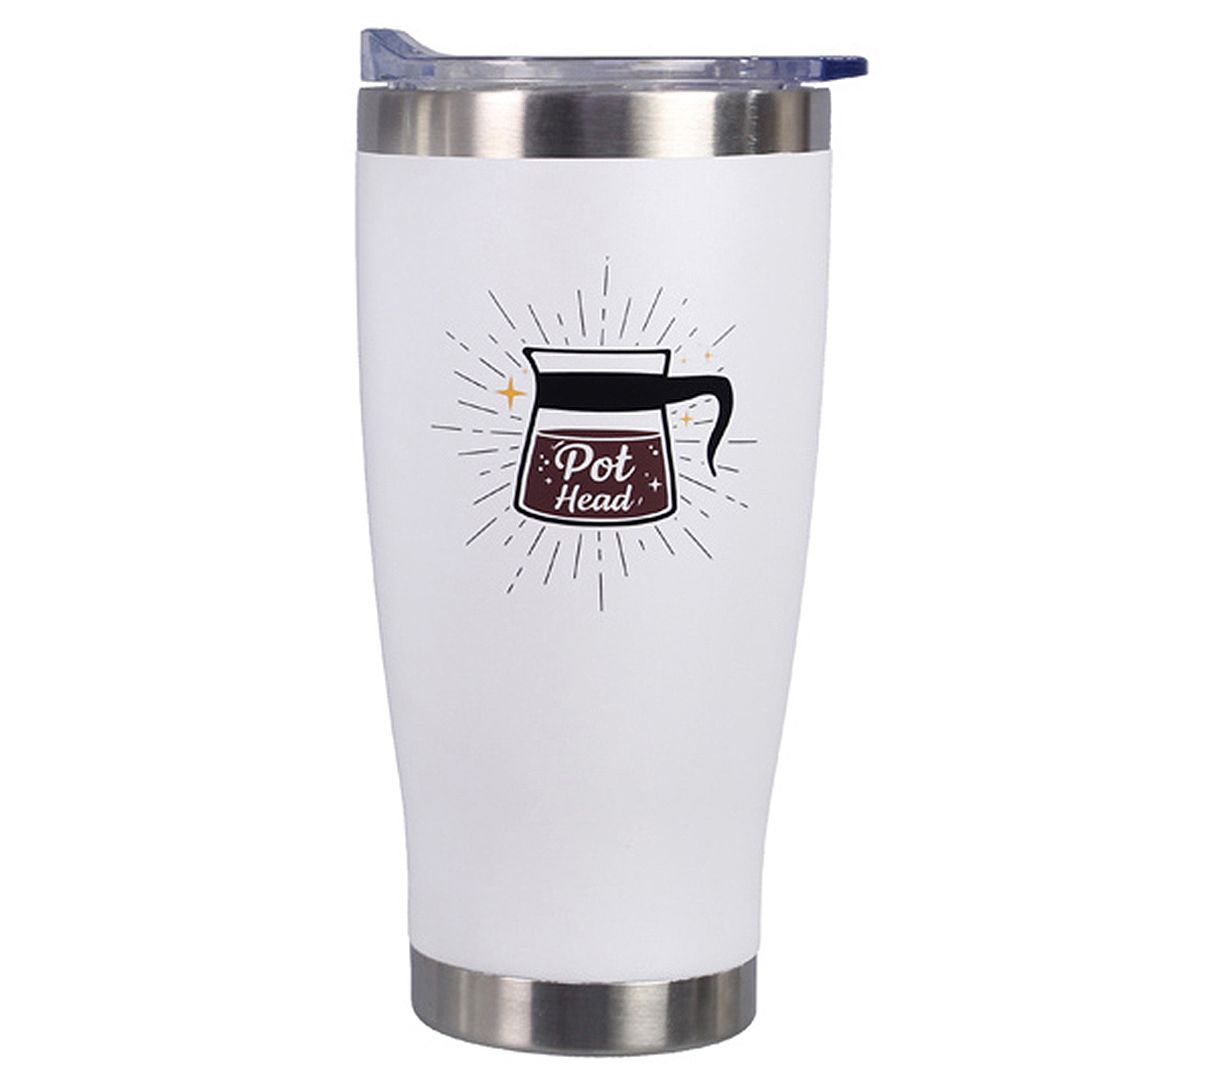 Thermos Stainless King Travel Mug with Handle (Brushed St/St)